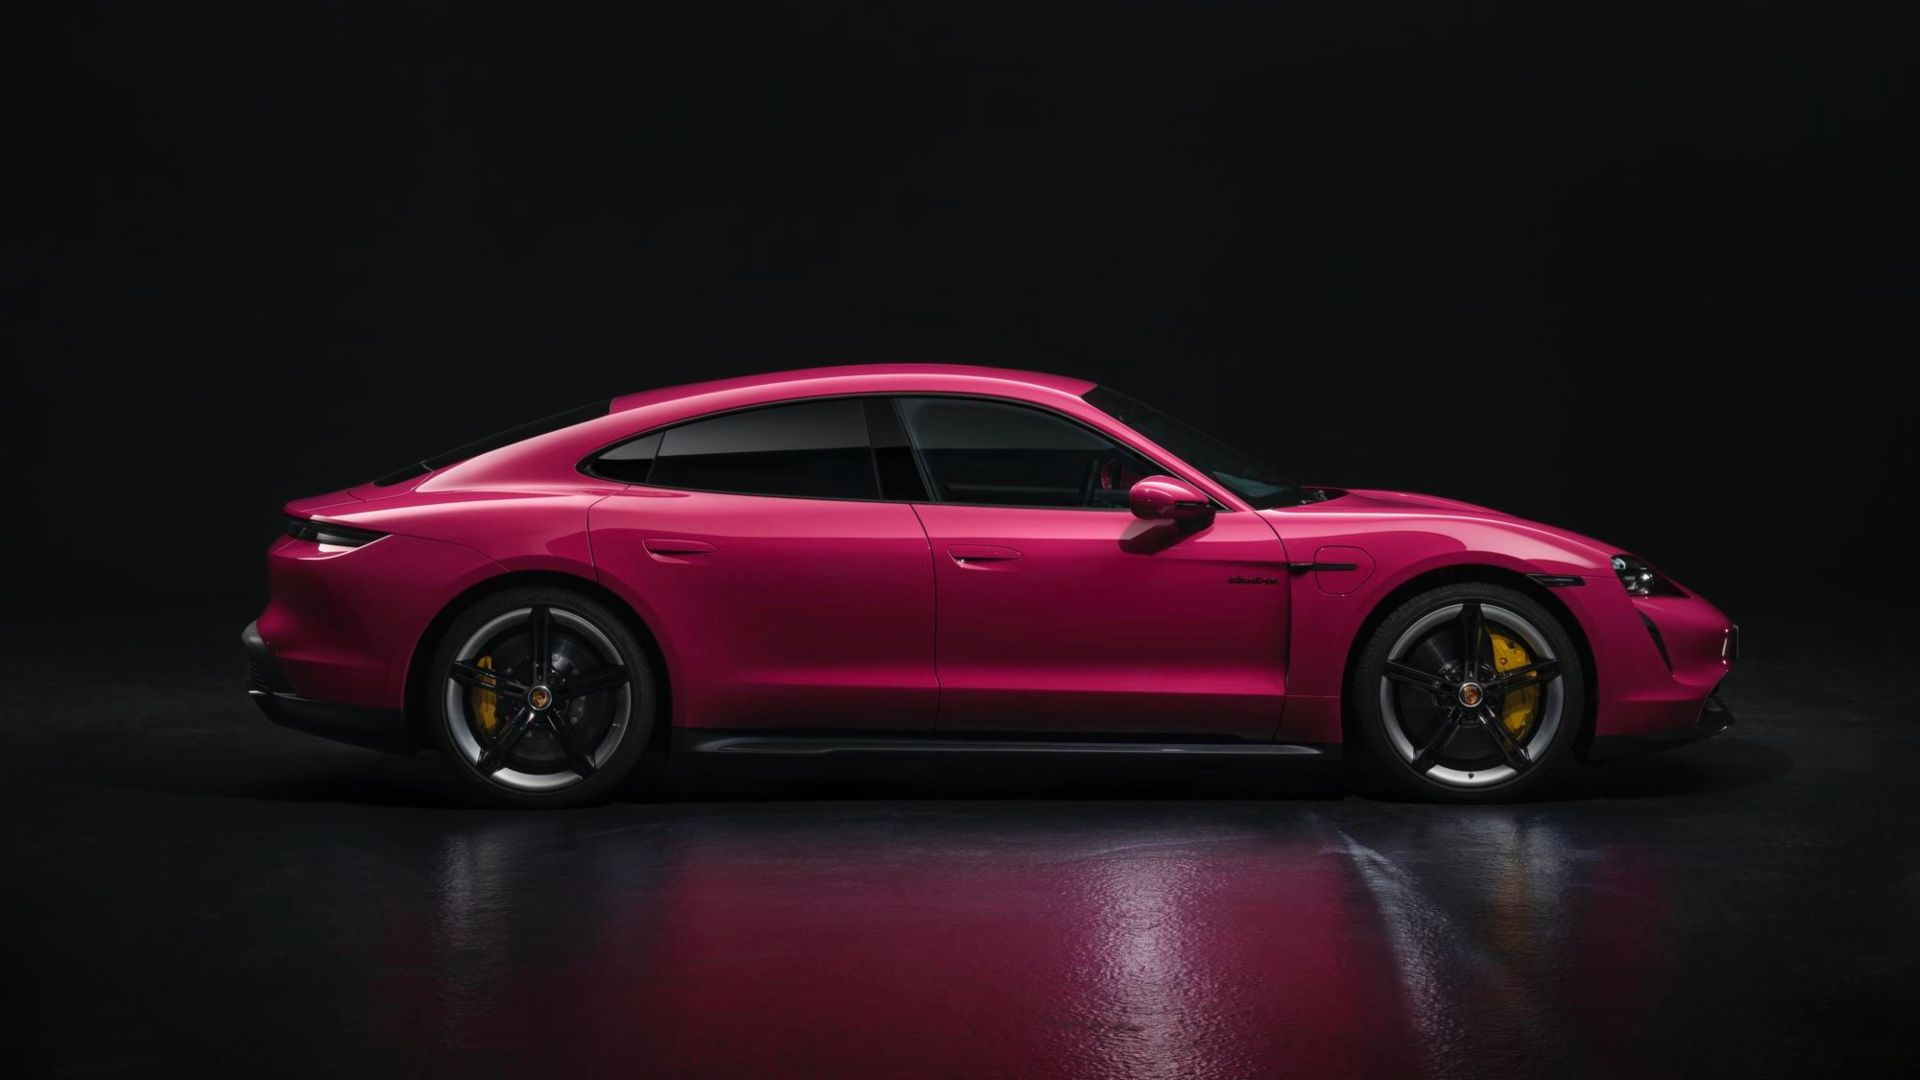 Porsche Taycan Turbo S in Rubystar Red from Paint to Sample program